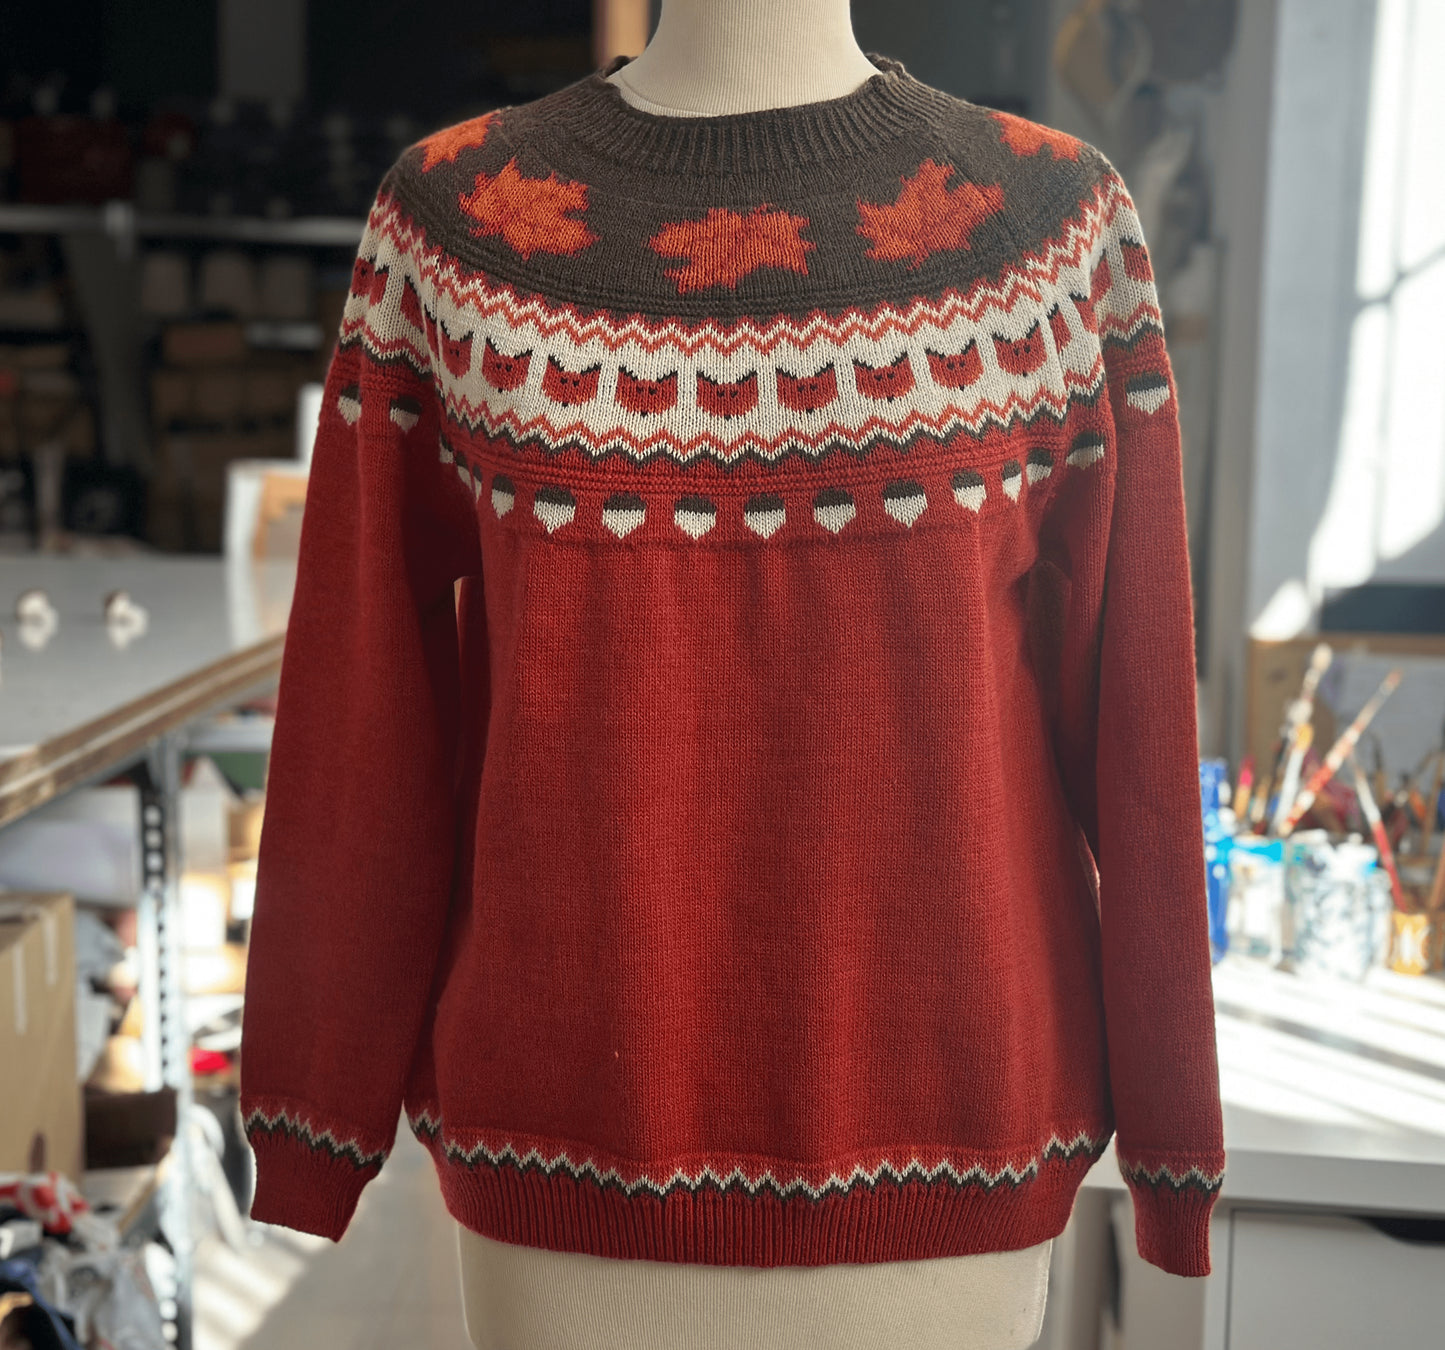 Autumn sweater with Foxes, maple leaves and Acorns